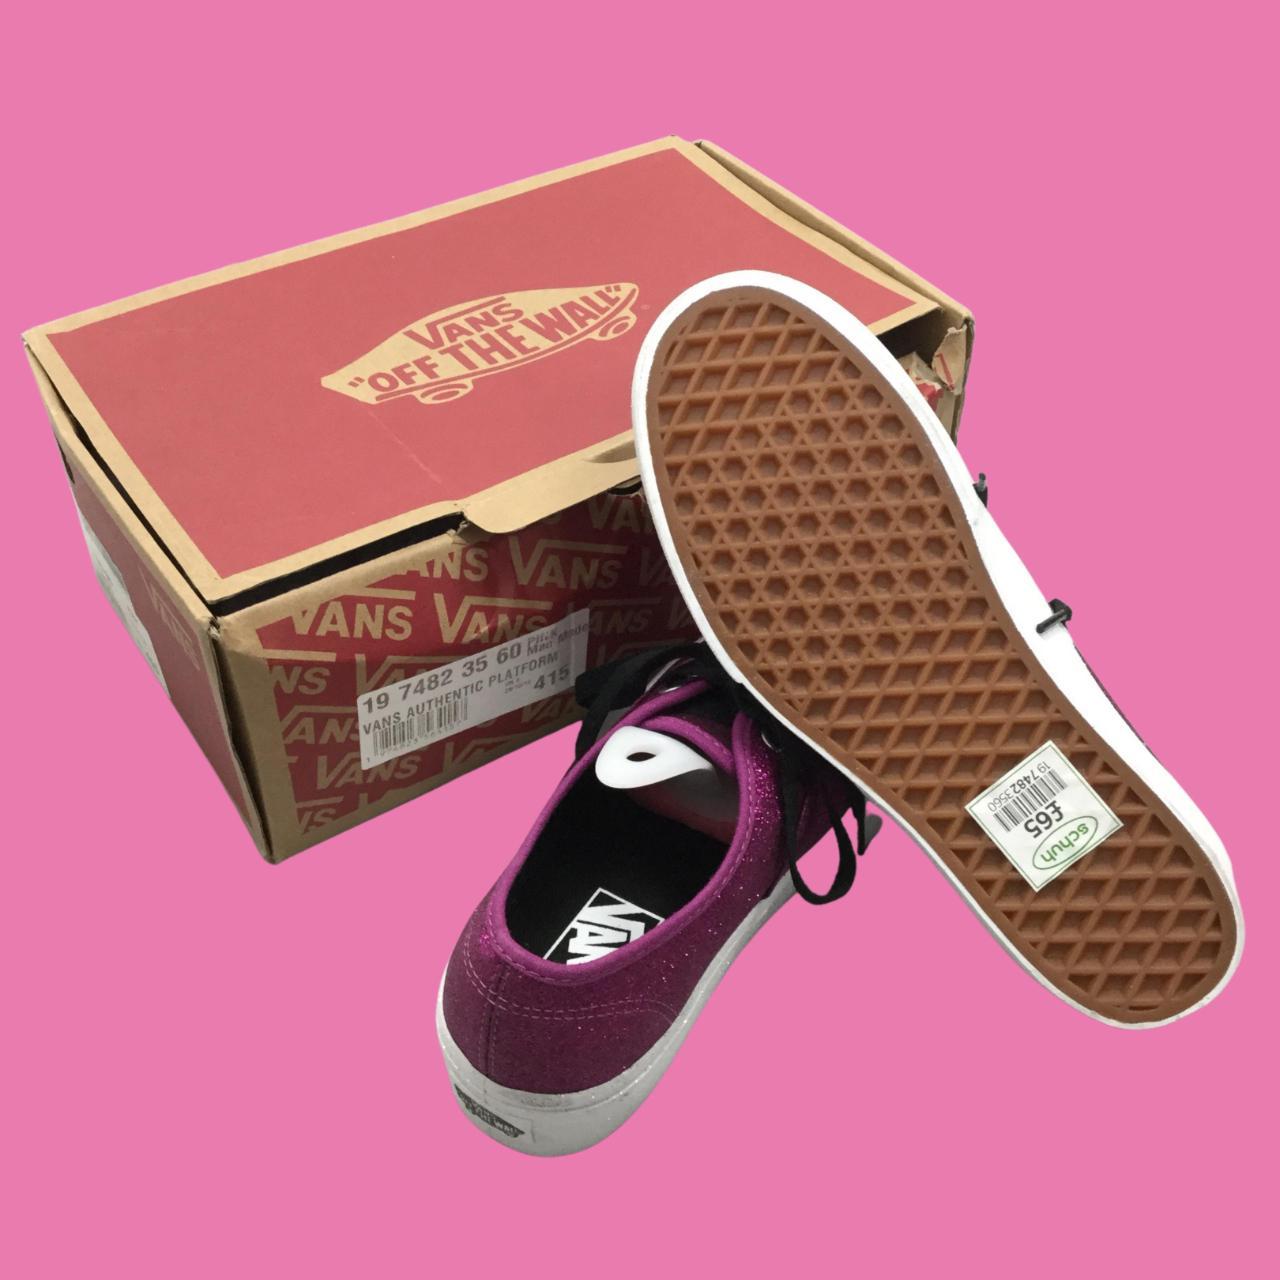 Product Image 3 - D8-08
VANS Trainers
-Glittered 
-Purple
-Lace up
-Ankle rise

Condition-